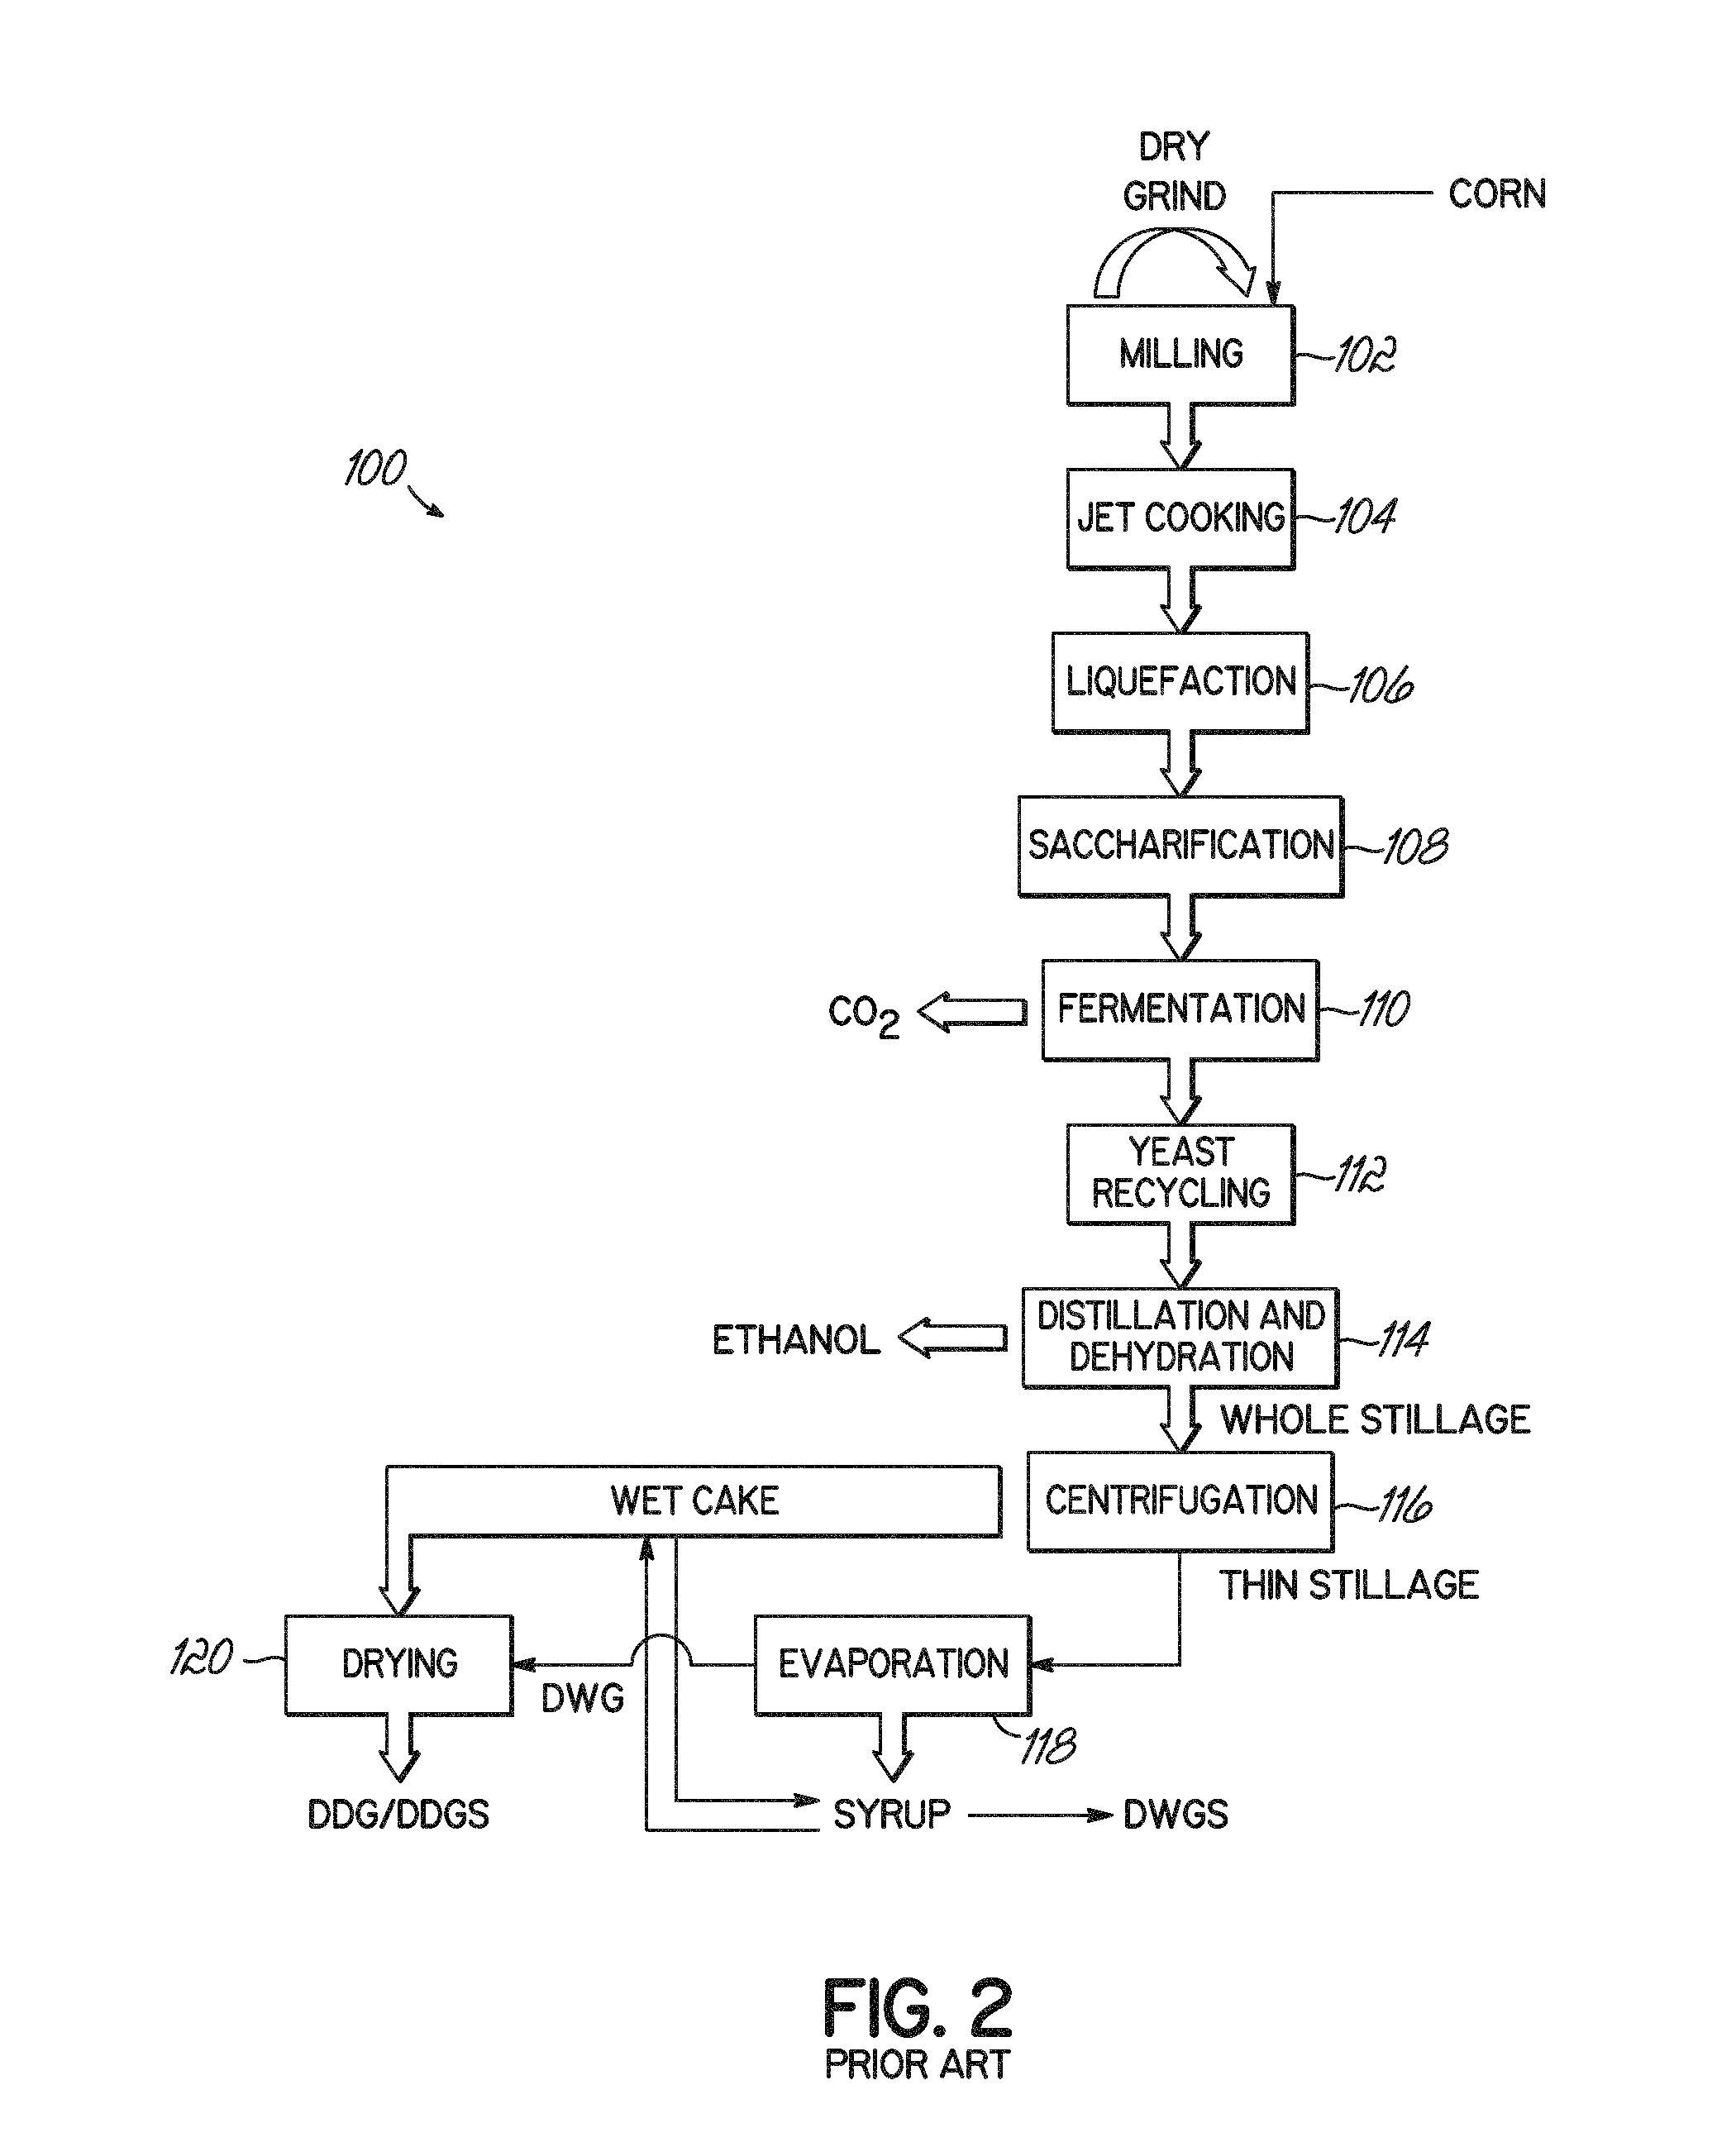 A system and method for separating high value by-products from grains used for alcohol production